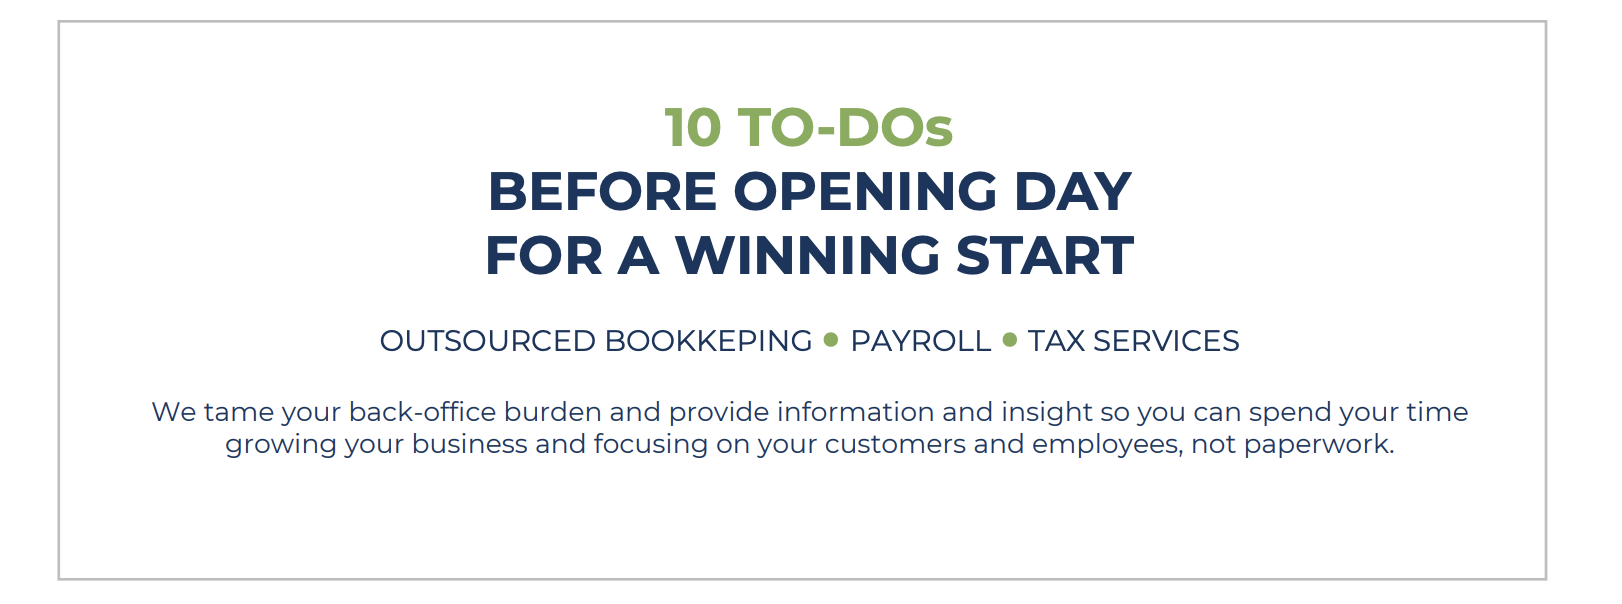 10 To-Dos for Opening Day for a Winning Start